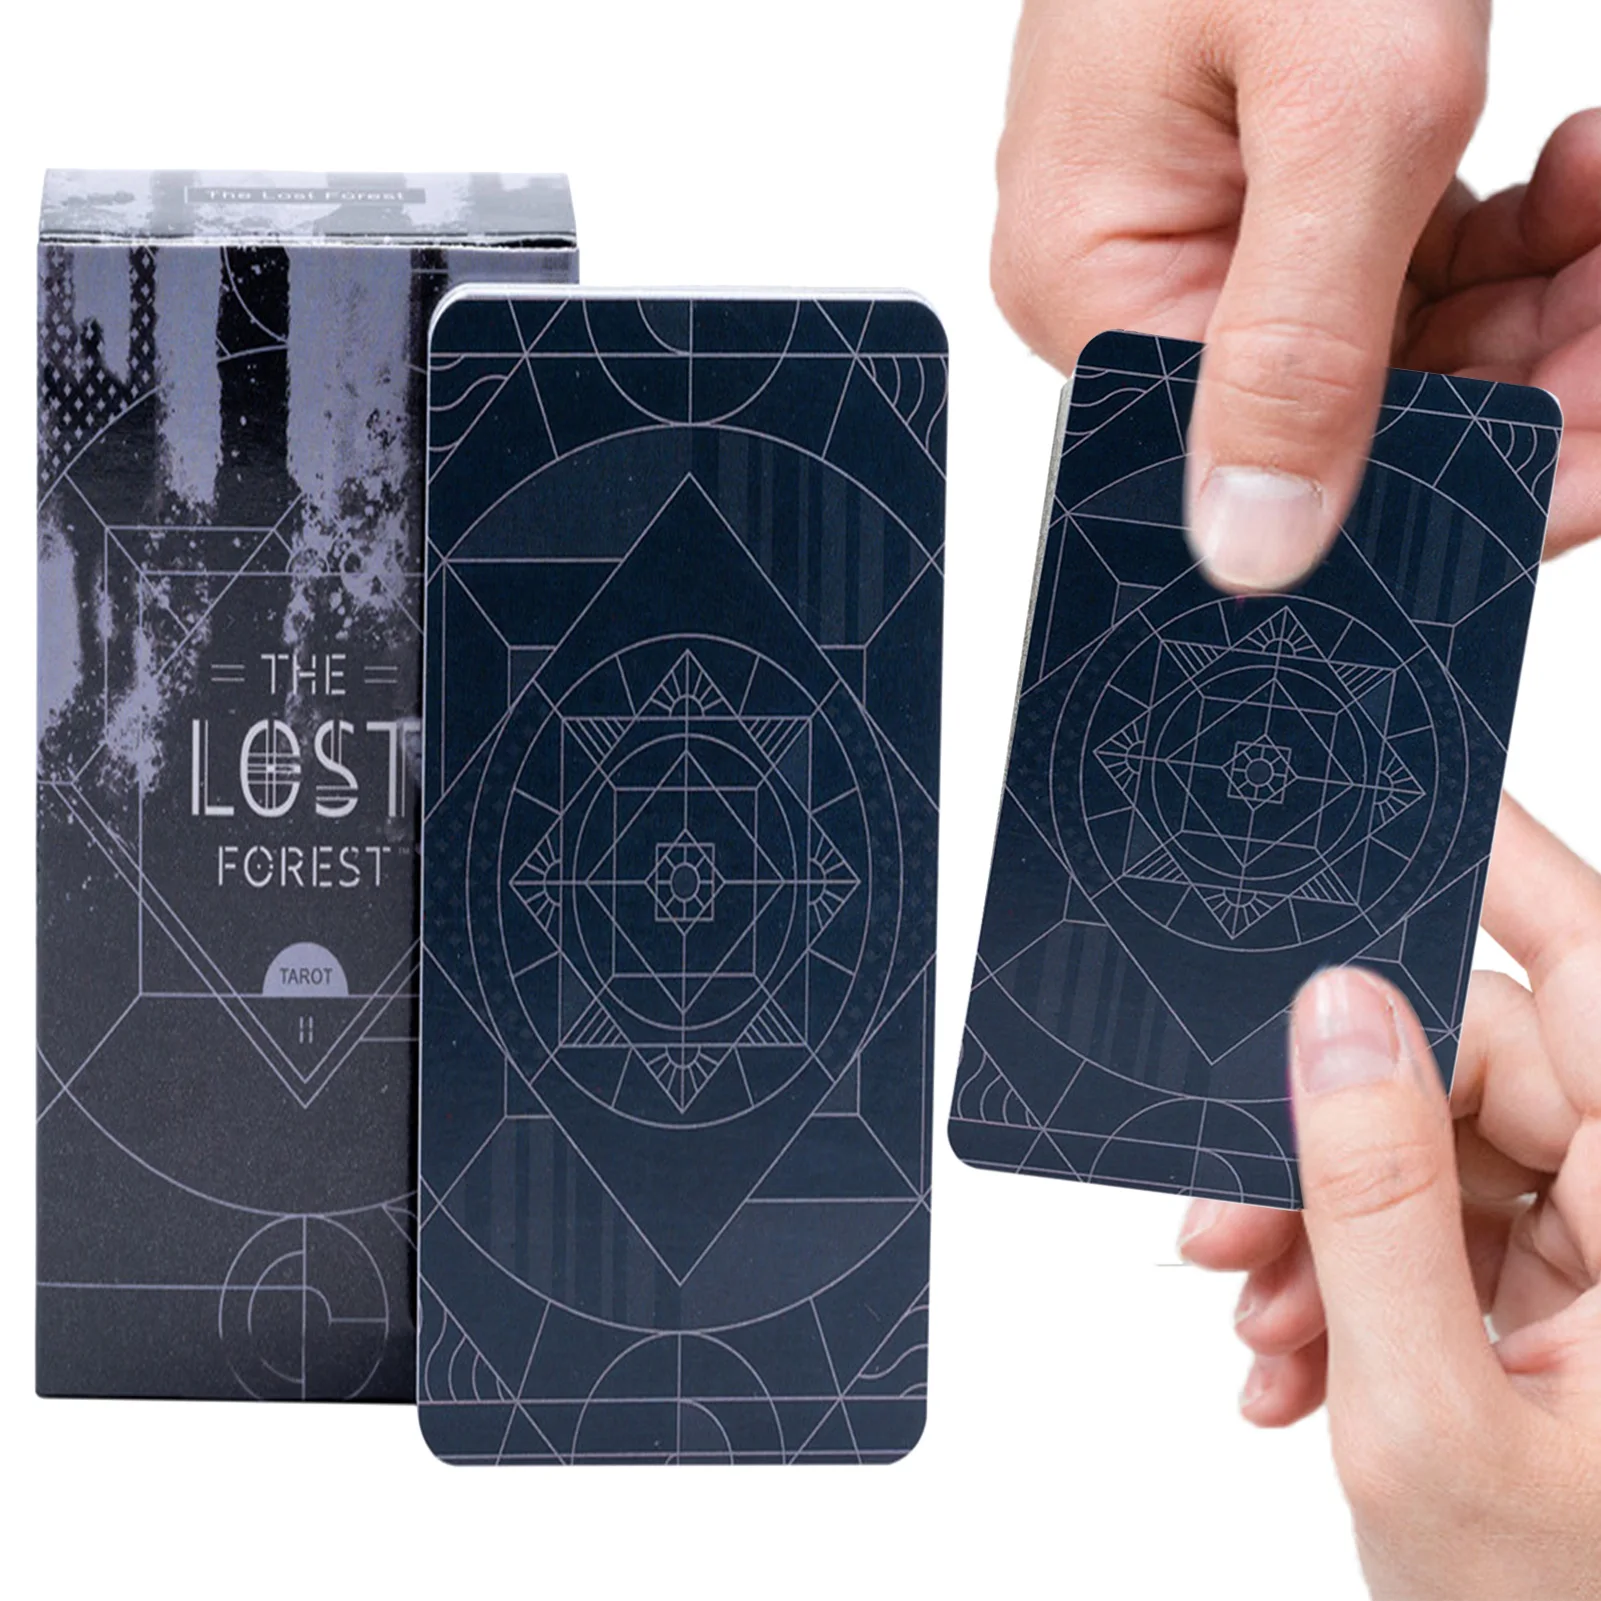 

The Lost Forest Tarot Deck Card Tarot Game Toy Artistic Tarot Divination Oracles Guidance Fate Board English Family Game Gift